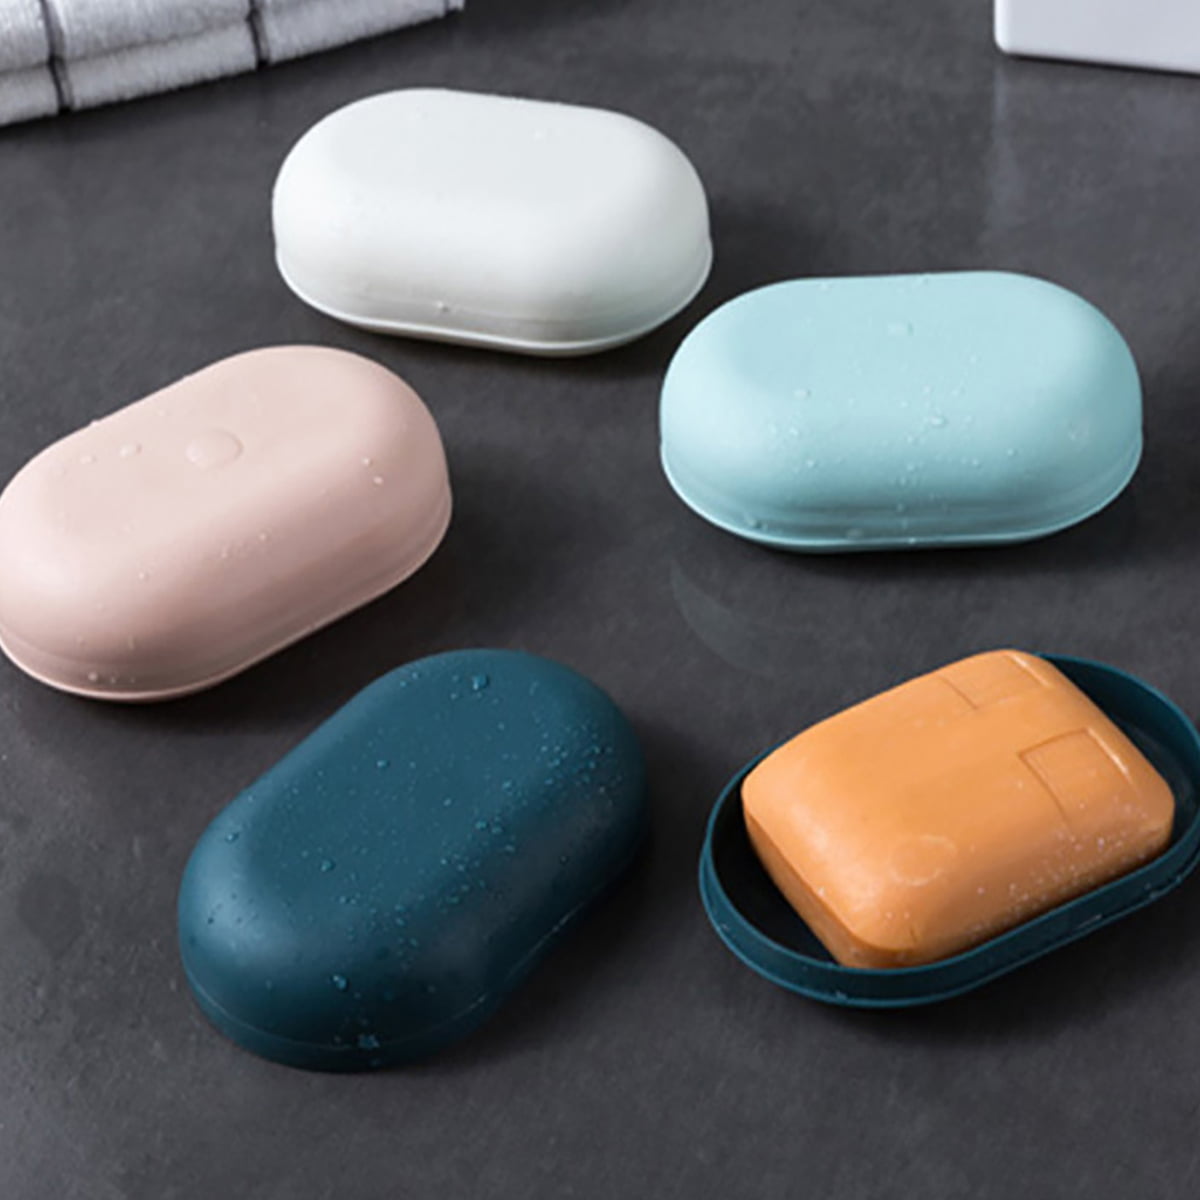 Details about   Color Soap Box Sealed Soap Case Round Travel Soap Holder Home Supplies 